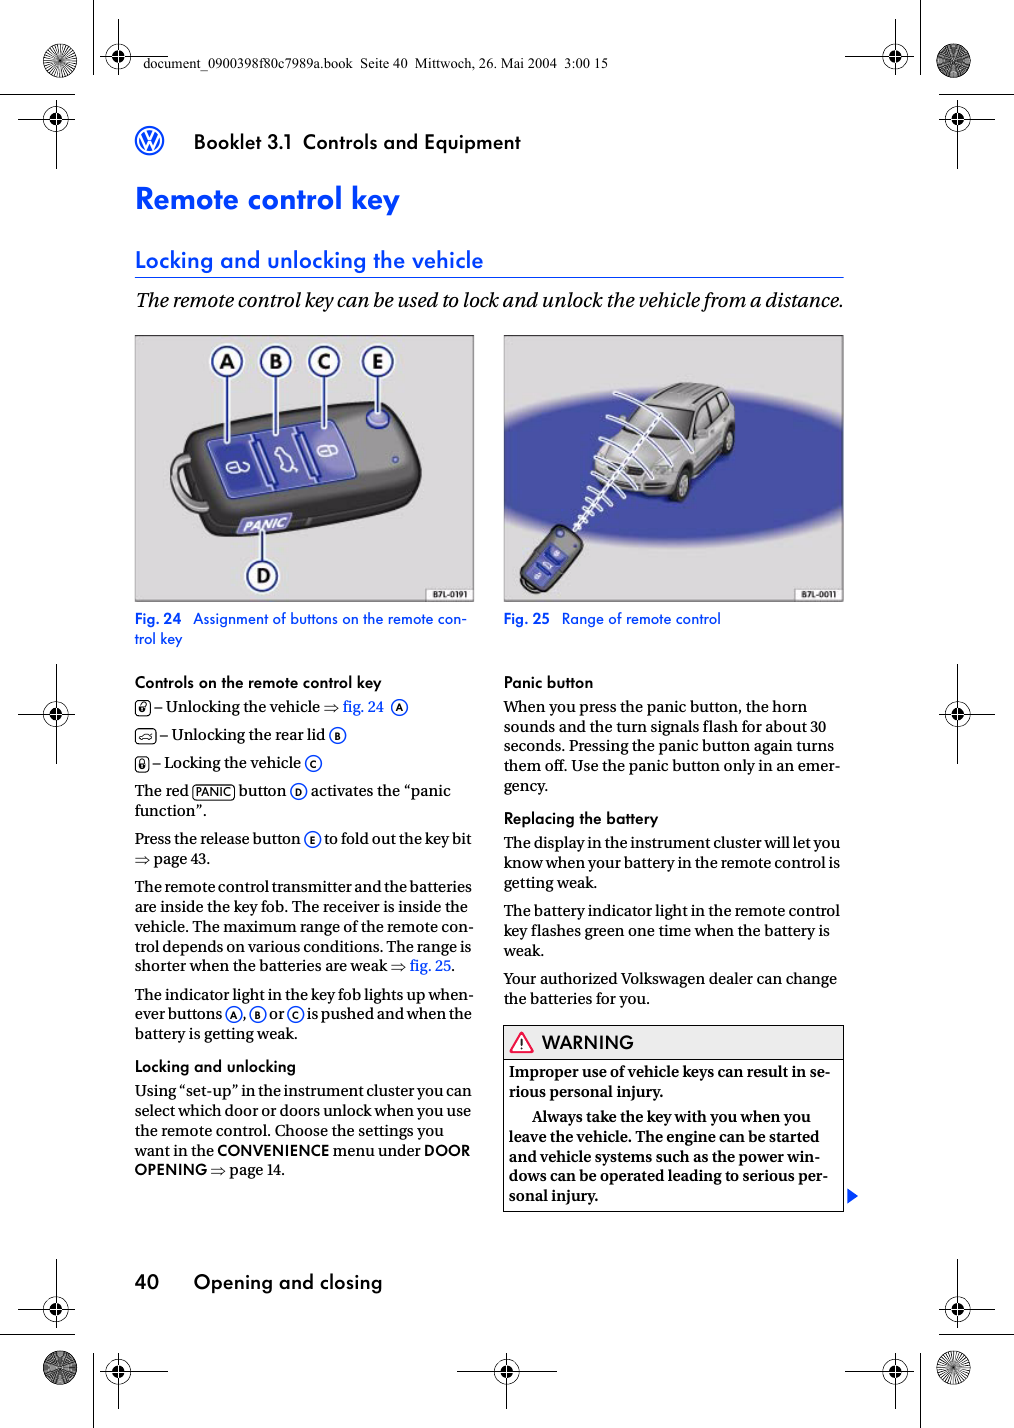 Booklet 3.1 Controls and EquipmentOpening and closing403Remote control keyLocking and unlocking the vehicleThe remote control key can be used to lock and unlock the vehicle from a distance.Fig. 24  Assignment of buttons on the remote con-trol keyFig. 25  Range of remote controlControls on the remote control key – Unlocking the vehicle ⇒fig. 24   – Unlocking the rear lid  – Locking the vehicle The red   button   activates the “panic function”.Press the release button   to fold out the key bit ⇒page 43.The remote control transmitter and the batteries are inside the key fob. The receiver is inside the vehicle. The maximum range of the remote con-trol depends on various conditions. The range is shorter when the batteries are weak ⇒fig. 25.The indicator light in the key fob lights up when-ever buttons ,  or  is pushed and when the battery is getting weak.Locking and unlockingUsing “set-up” in the instrument cluster you can select which door or doors unlock when you use the remote control. Choose the settings you want in the CONVENIENCE menu under DOOR OPENING ⇒page 14.Panic buttonWhen you press the panic button, the horn sounds and the turn signals flash for about 30 seconds. Pressing the panic button again turns them off. Use the panic button only in an emer-gency.Replacing the batteryThe display in the instrument cluster will let you know when your battery in the remote control is getting weak.The battery indicator light in the remote control key flashes green one time when the battery is weak.Your authorized Volkswagen dealer can change the batteries for you.WARNINGImproper use of vehicle keys can result in se-rious personal injury.Always take the key with you when you leave the vehicle. The engine can be started and vehicle systems such as the power win-dows can be operated leading to serious per-sonal injury.0AAAB1ACPANIC ADAEAAABACdocument_0900398f80c7989a.book  Seite 40  Mittwoch, 26. Mai 2004  3:00 15